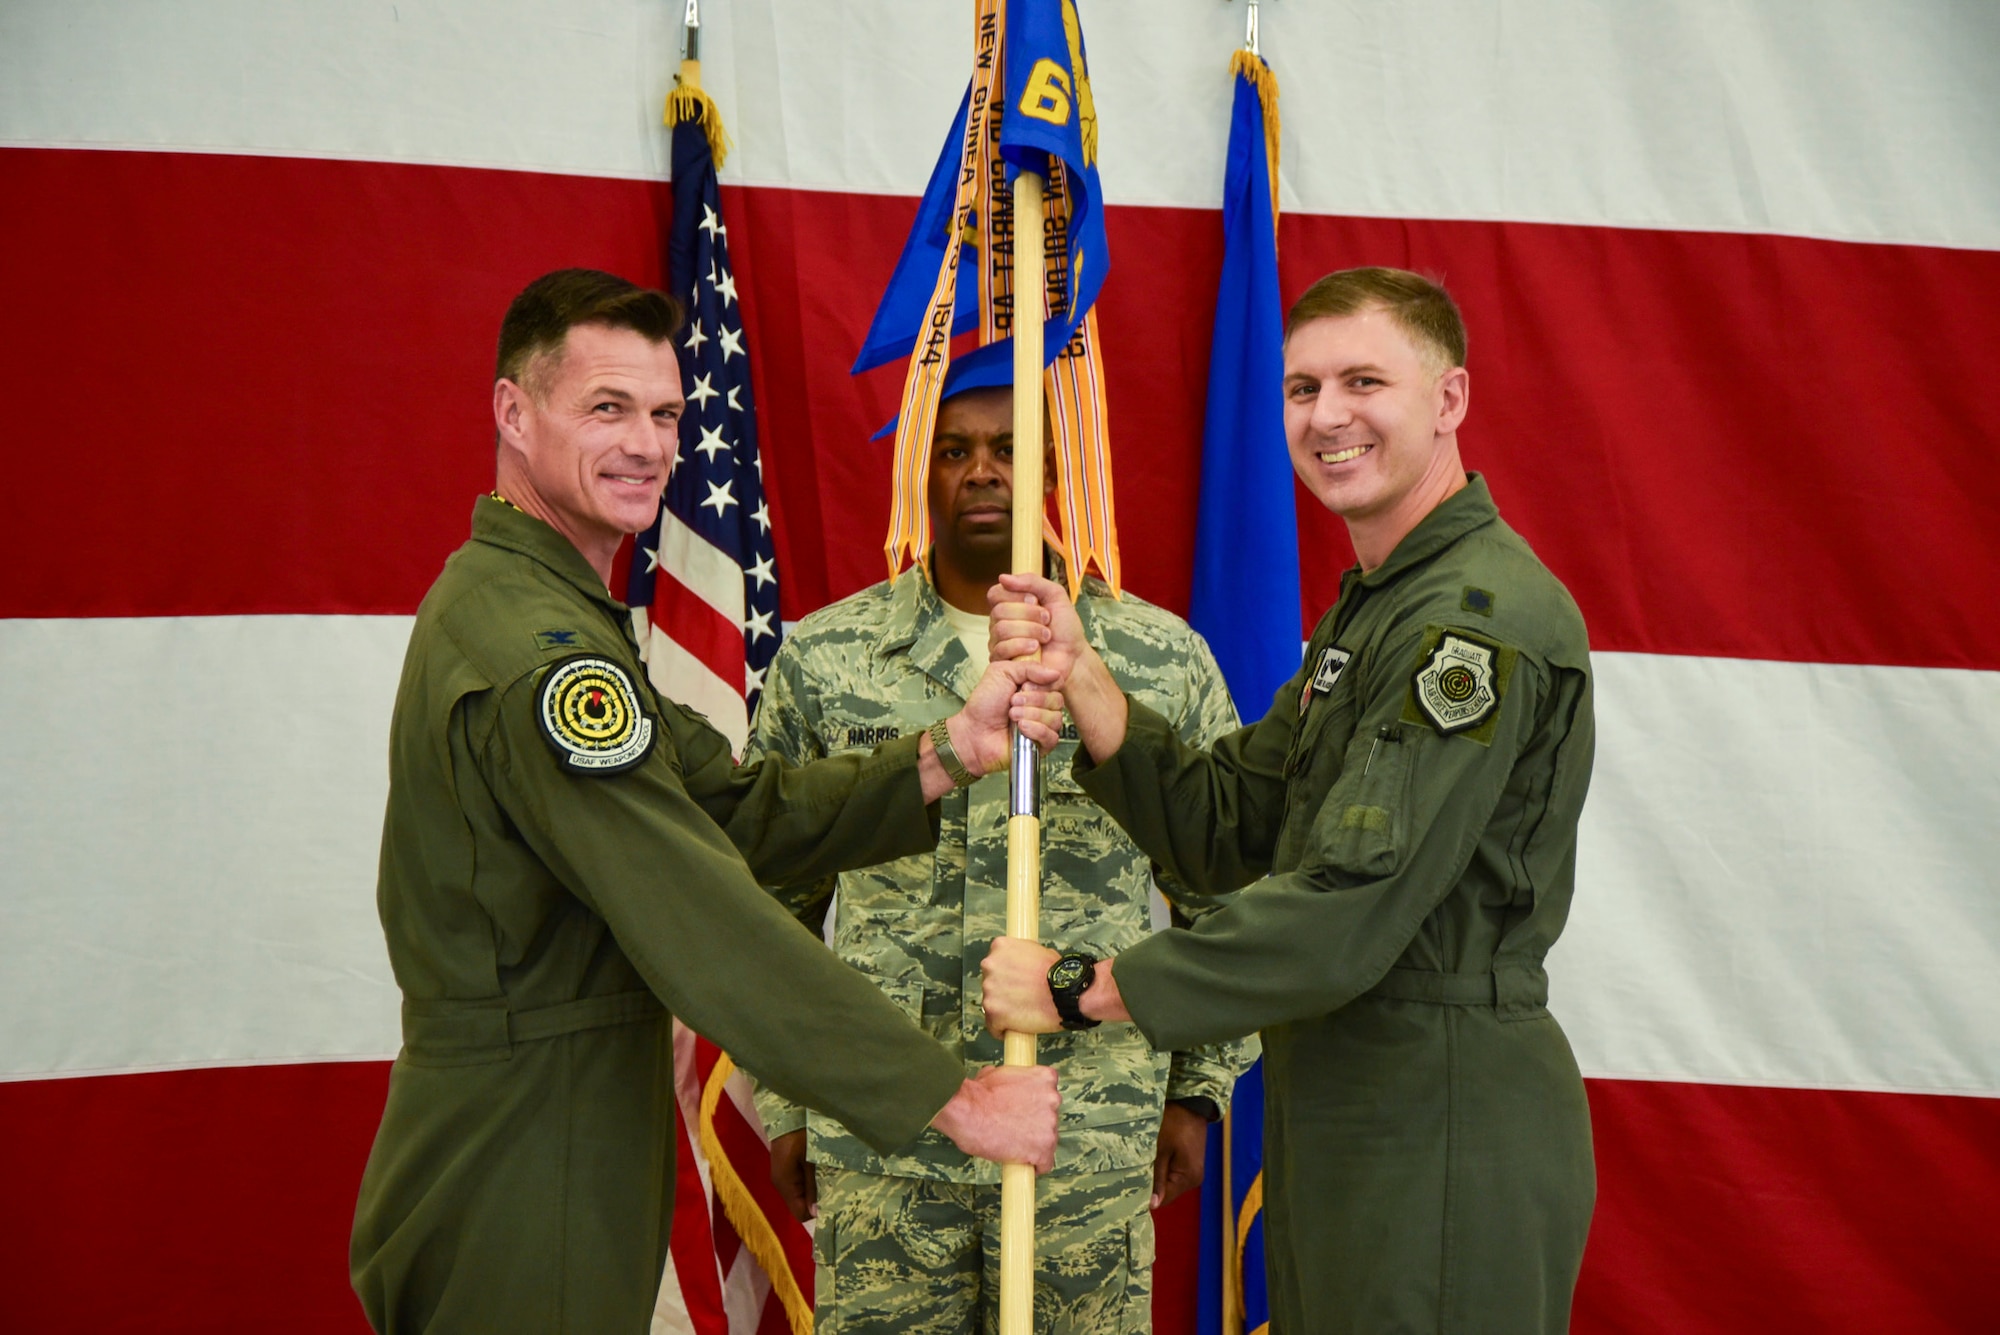 Lt. Col. Michael Blauser, 6th Weapons Squadron commander, assumes command of the squadron from Col. Michael Drowley, US Air Force Weapons School commandant, June 20, 2017, at Nellis Air Force Base, Nev. The 6th WPS was inactivated more than 70 years ago due to force-wide budget cuts. (U.S. Air Force photo by Airman 1st Class Andrew D. Sarver/Released)